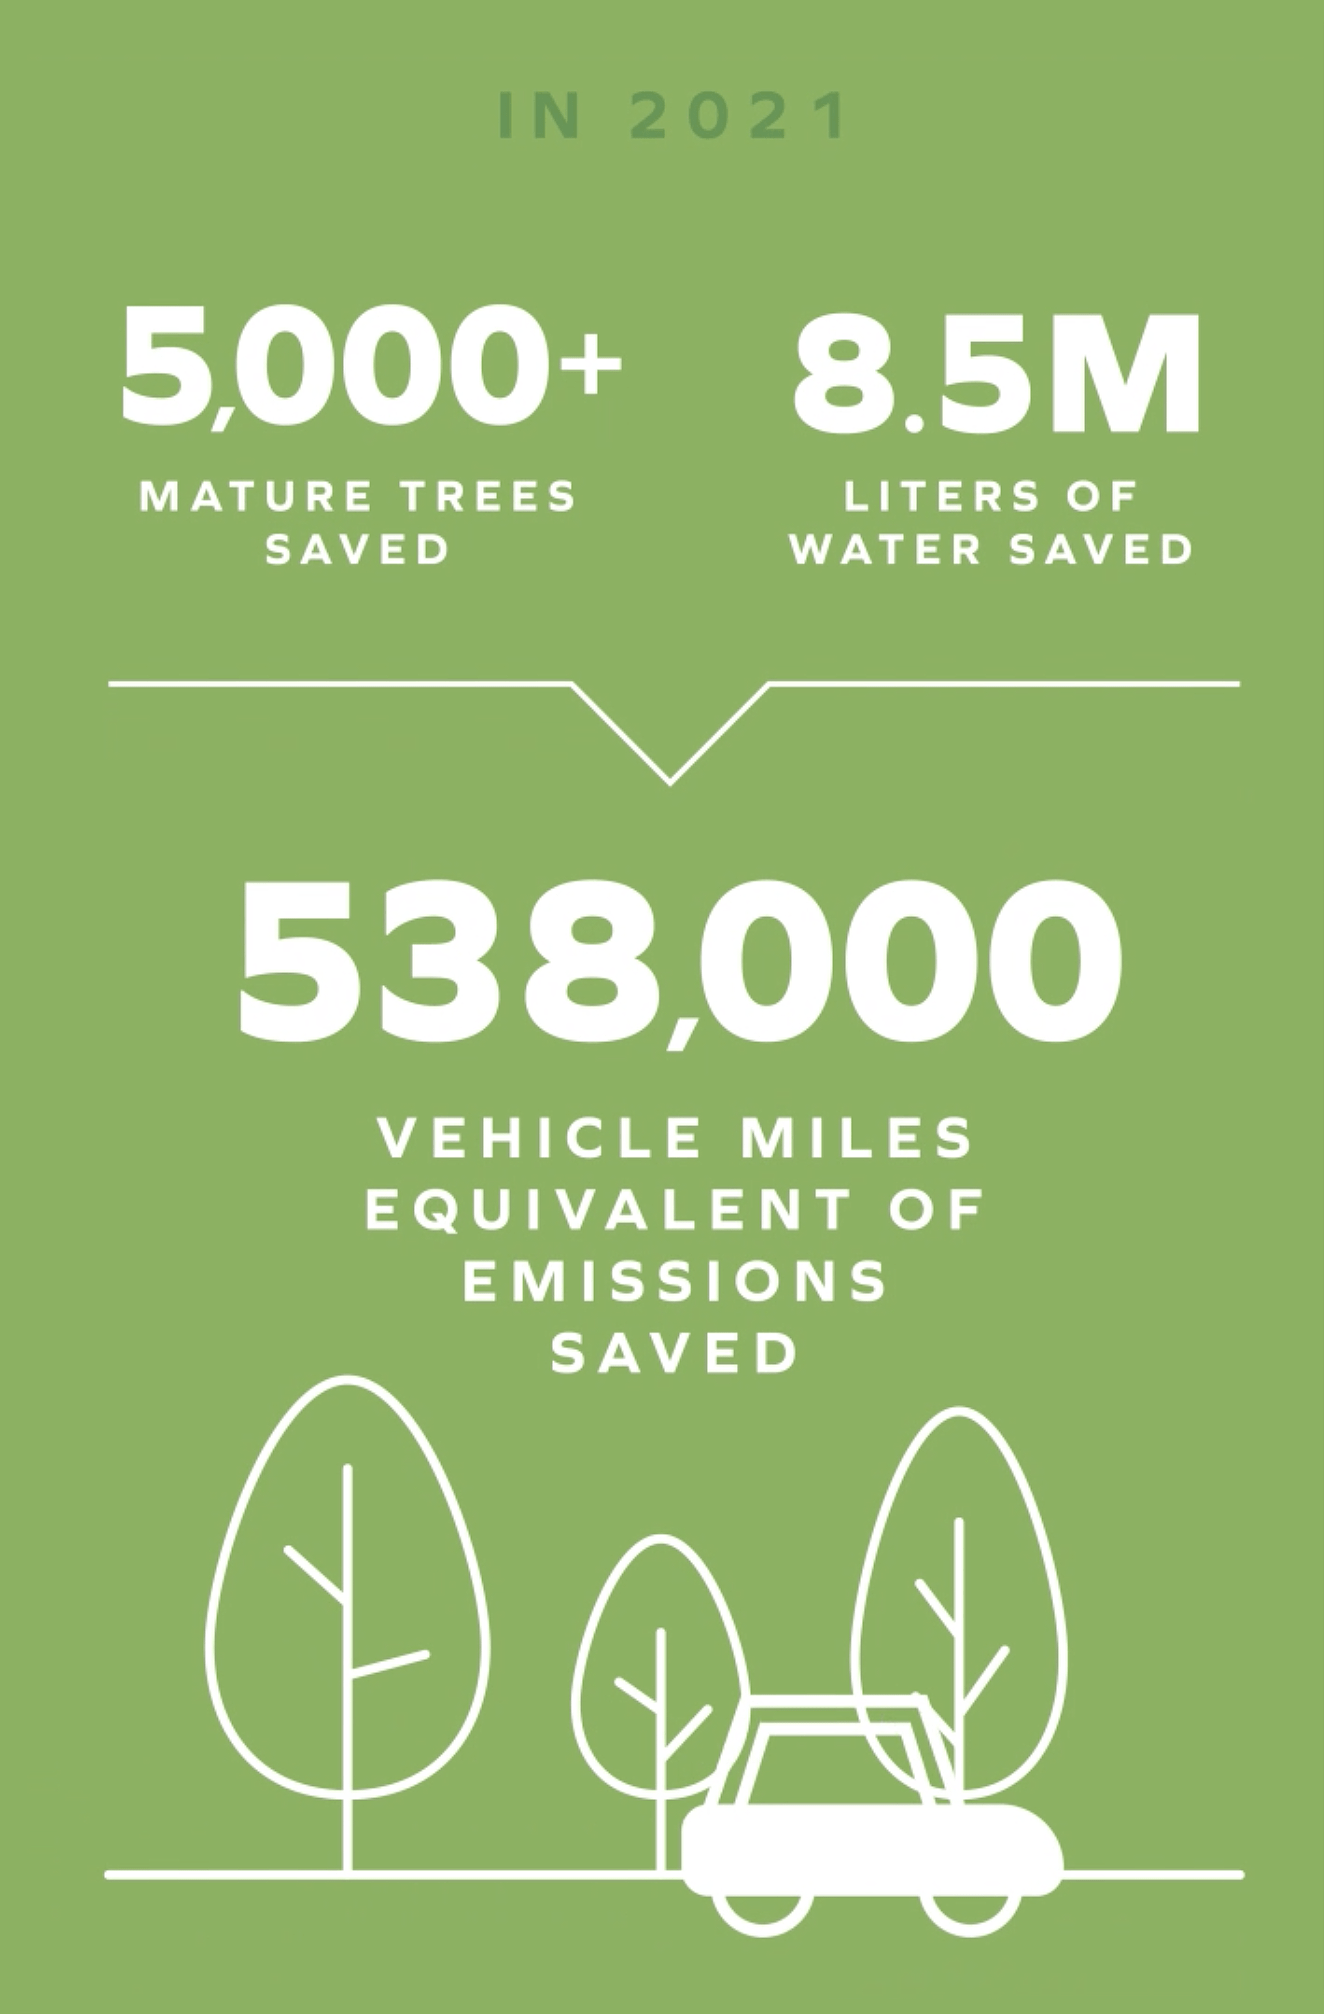 Facts about the impact of zero-waste programs at our Niagara Falls plant.